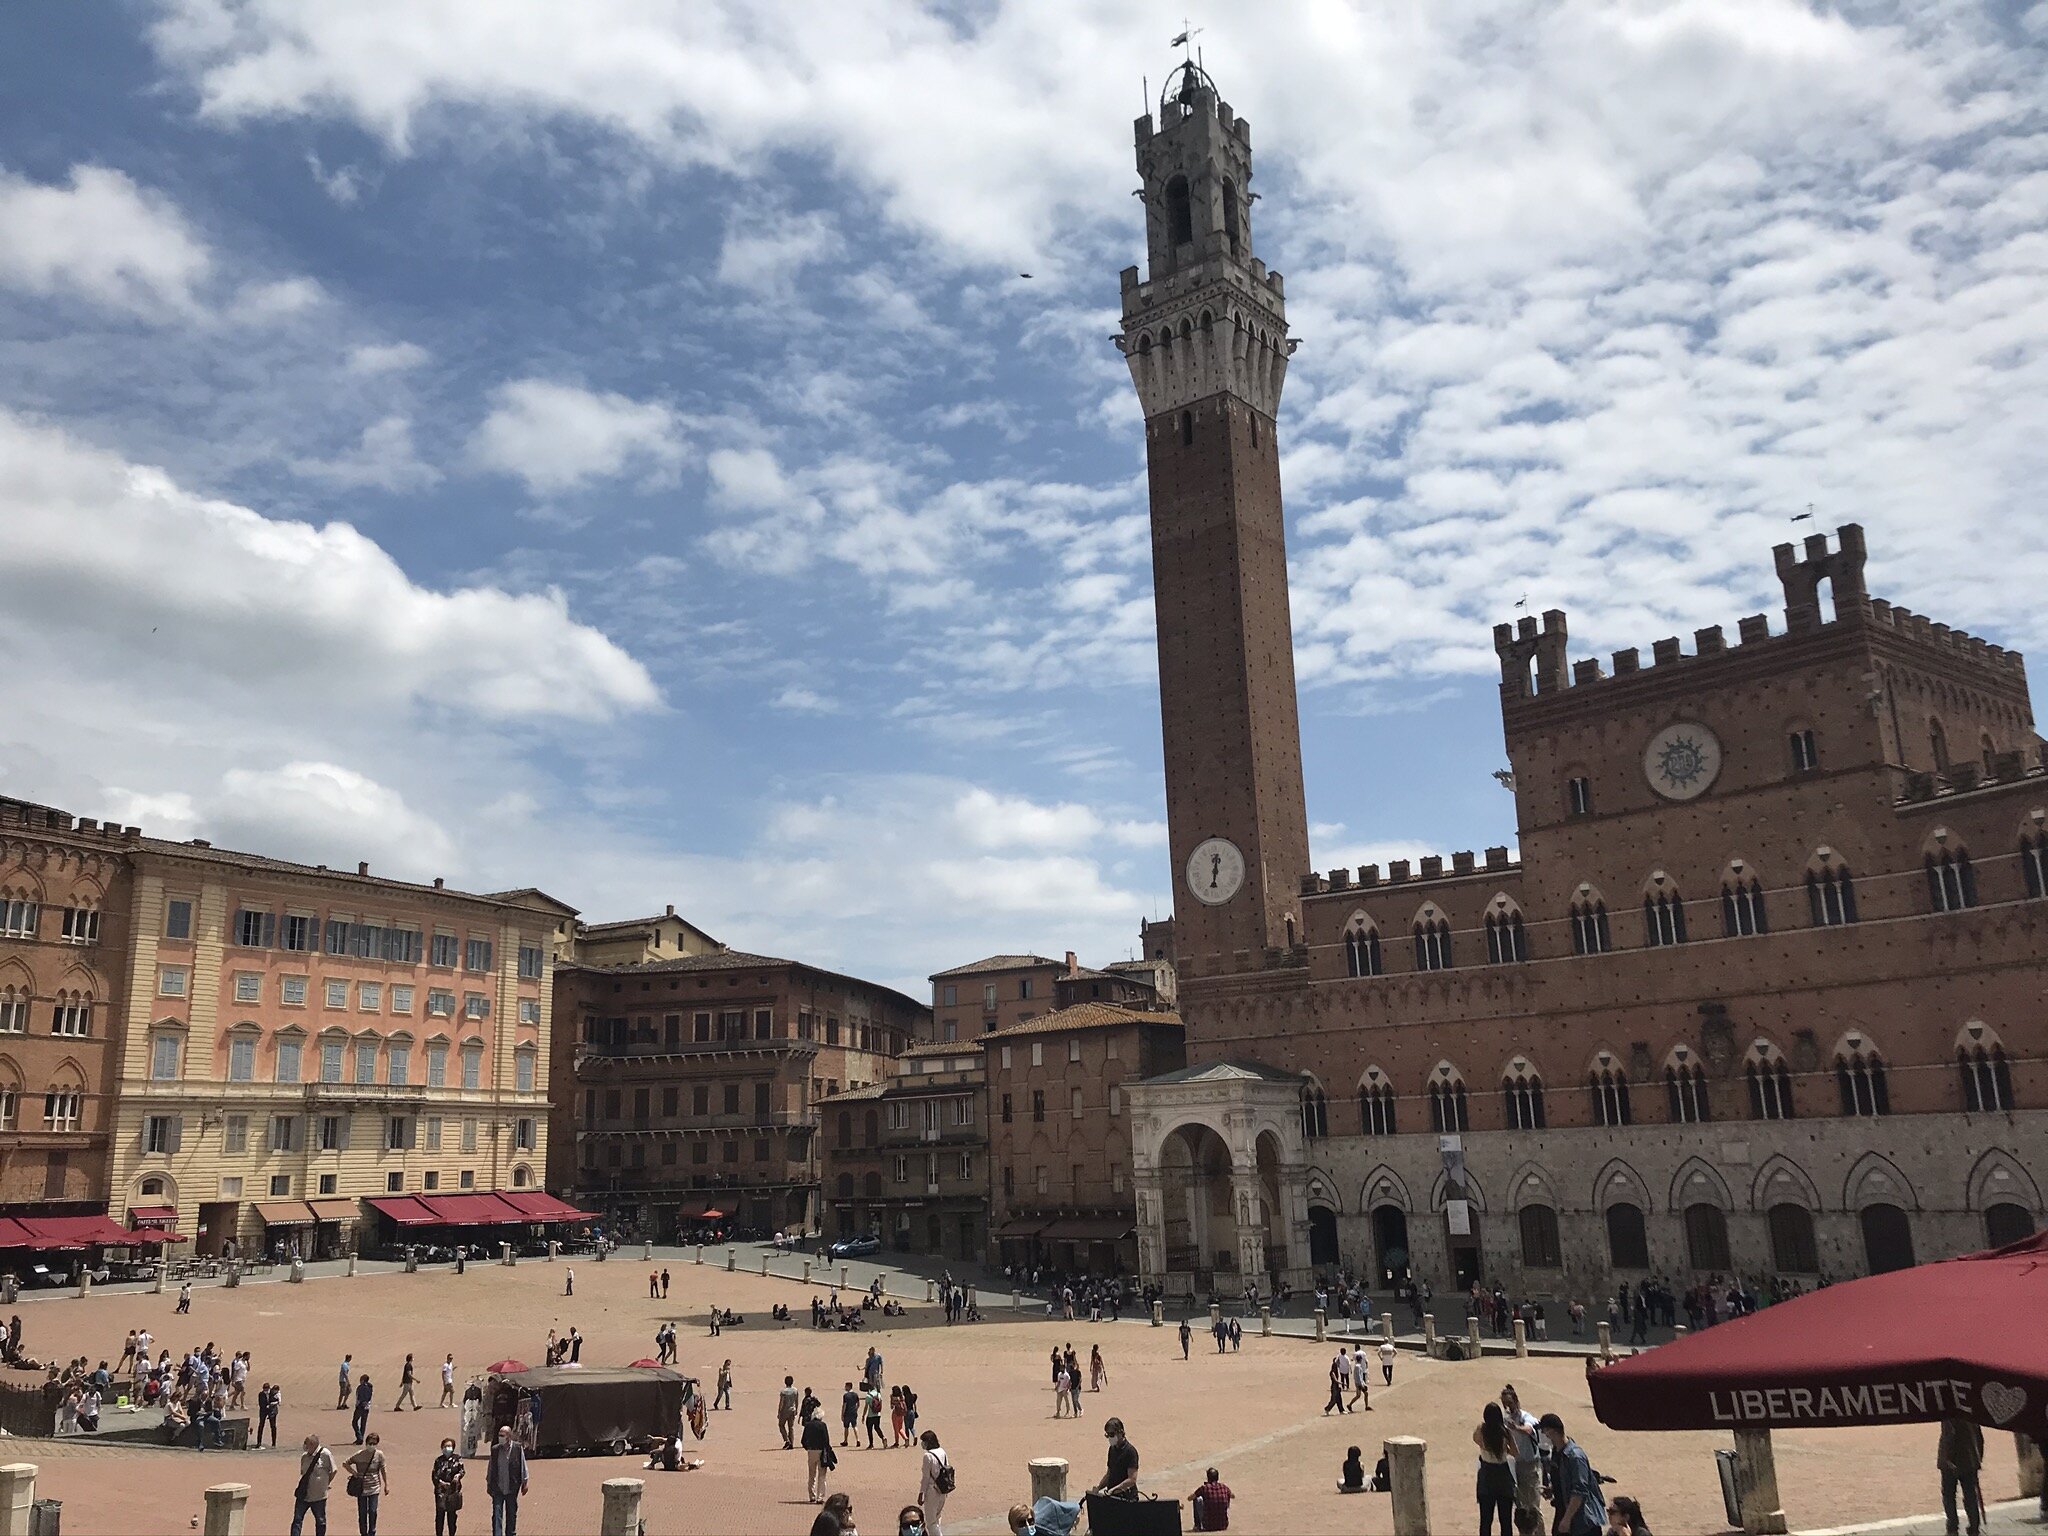 SIENA, Italy. June 4th, 2021. PICTURED: The famous Piazza del Campo, or Plaza of the Field, where the Palio takes place every year.